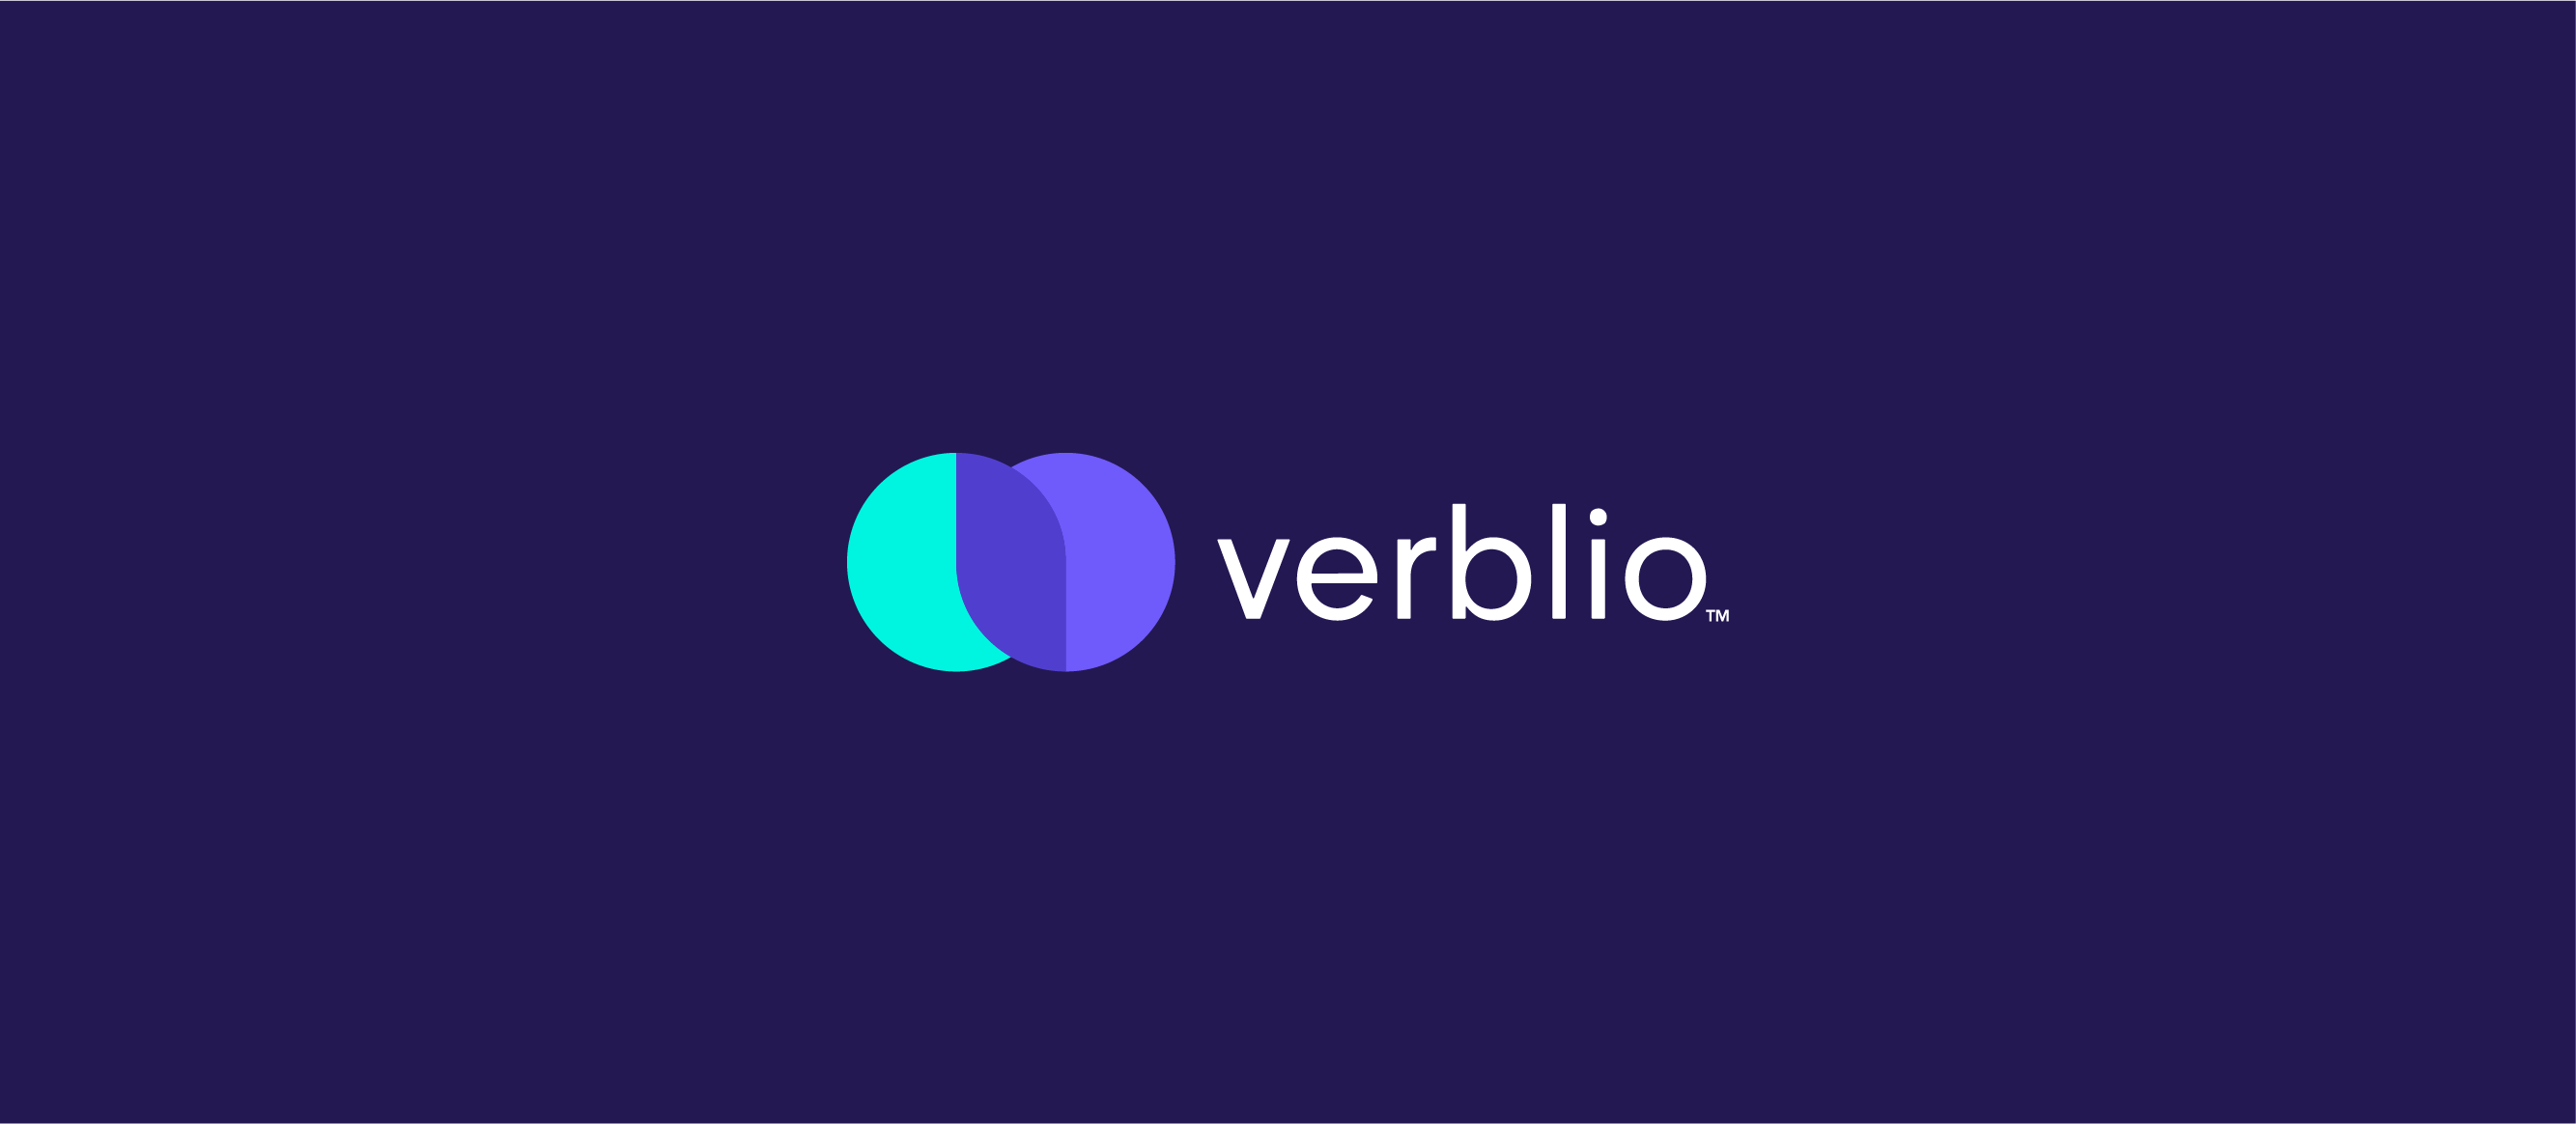 image of verblio 4 color and single color logo versions designed by lulofs